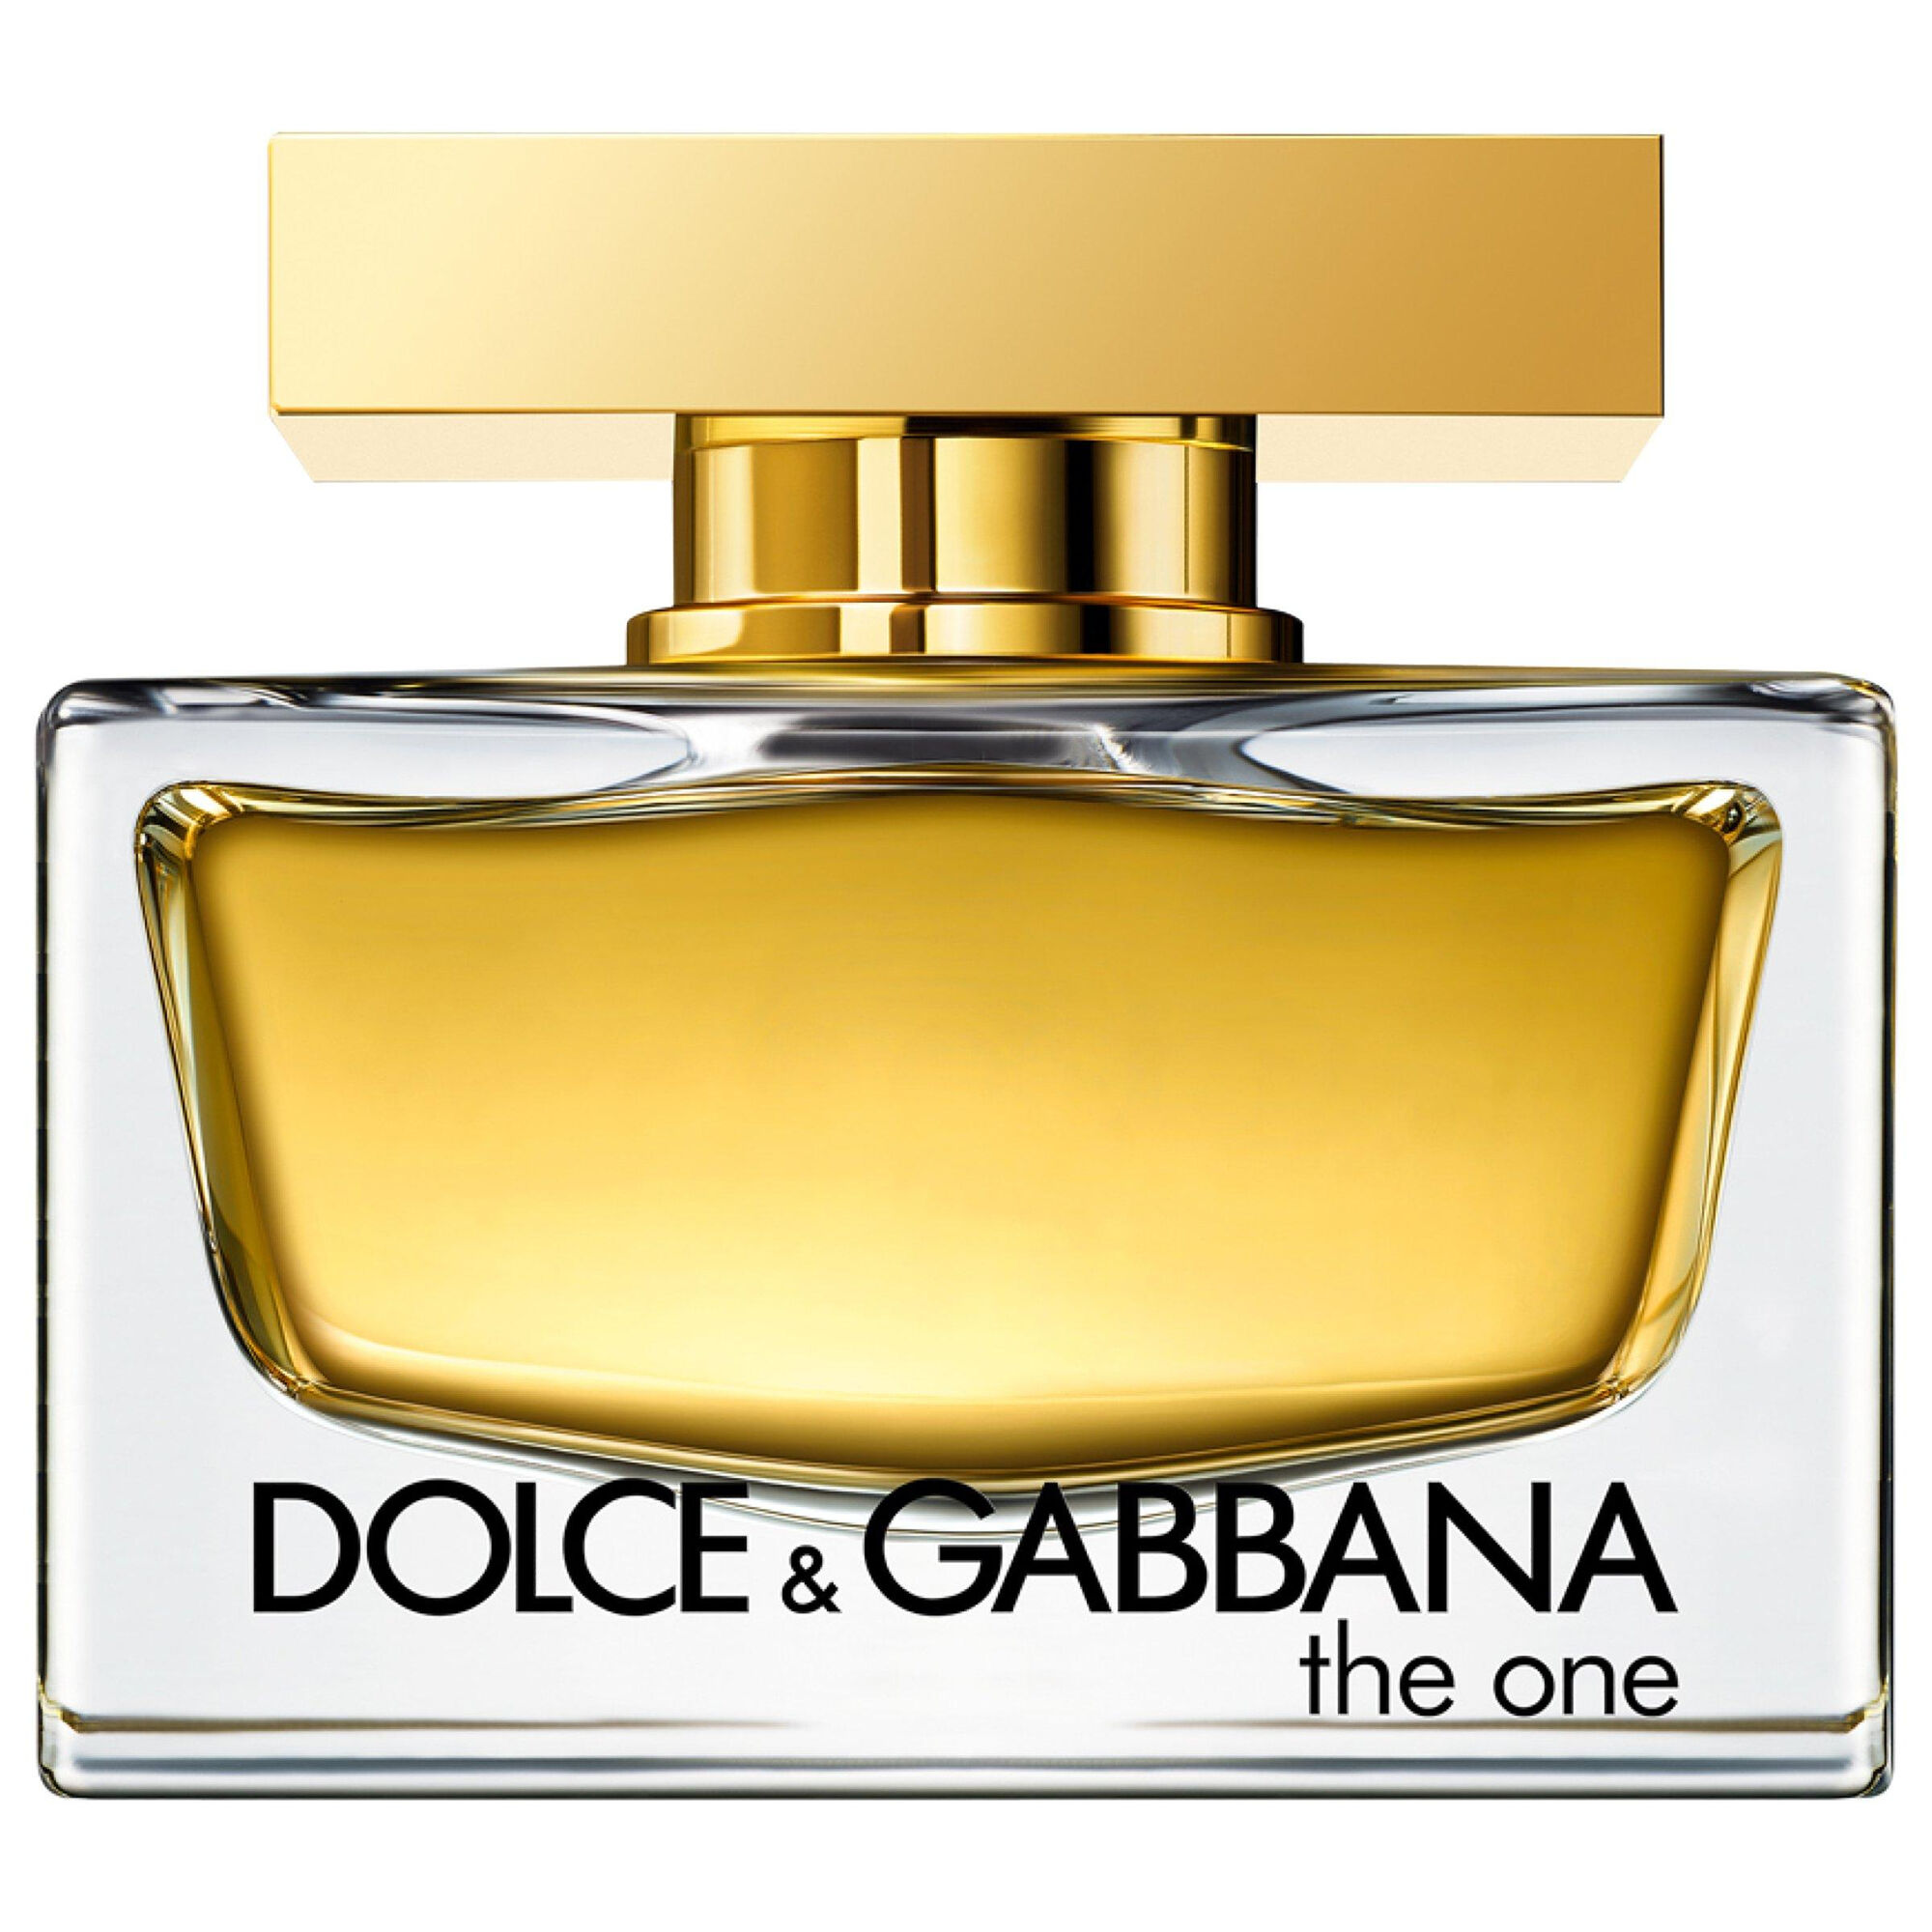 Dolce gabbana the one for woman. The one women Dolce&Gabbana 75 мл. Dolce Gabbana the one 75 ml. Евро Dolce & Gabbana the one,EDP., 75 ml. Дольче Габбана the one 50 мл женские.